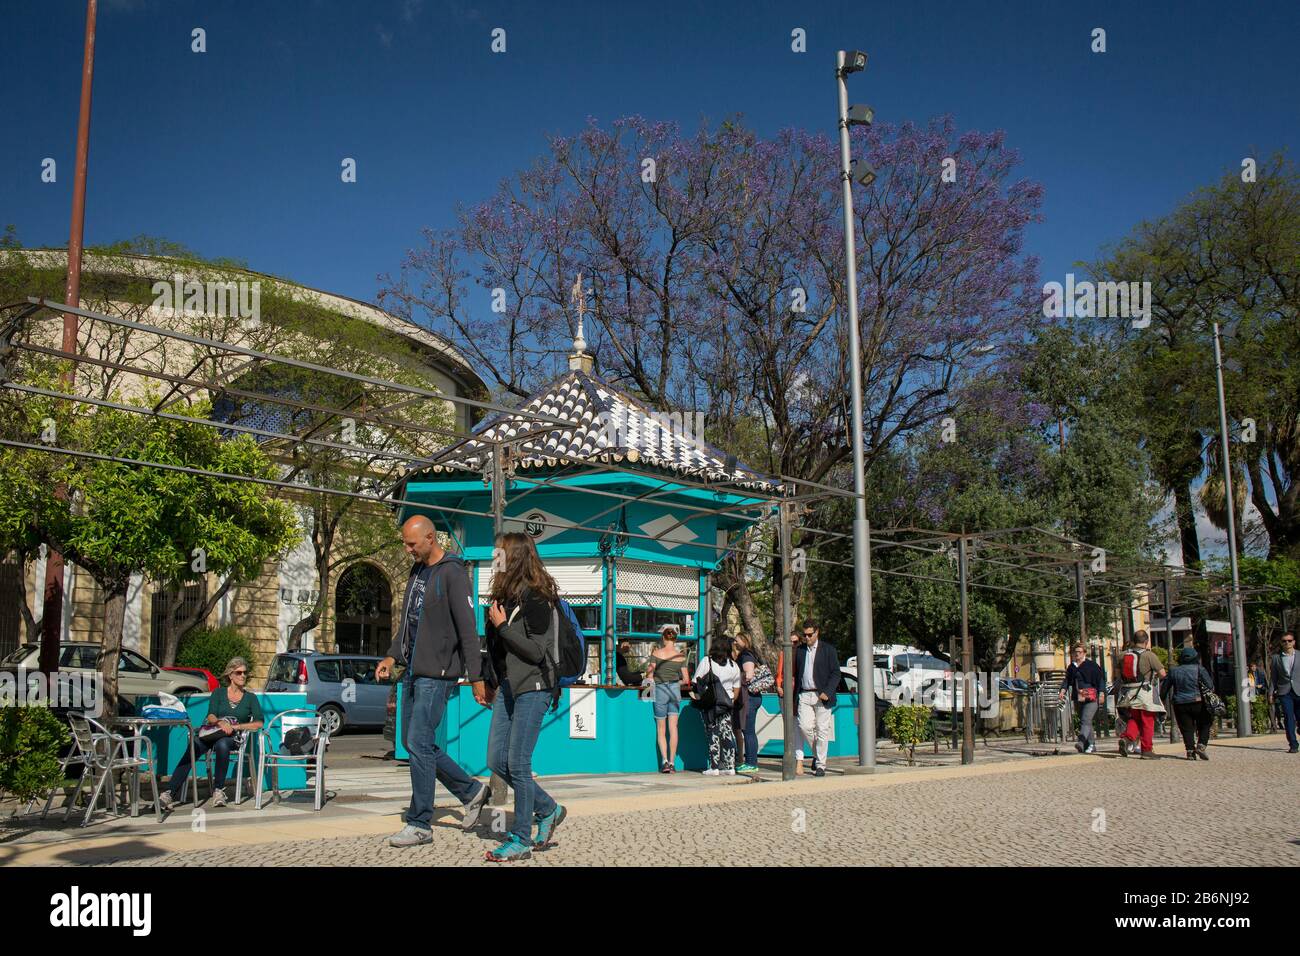 Passersby and kiosk with terrace at Cristobal Colon Walk on a spring and sunny day, Seville, Spain Stock Photo